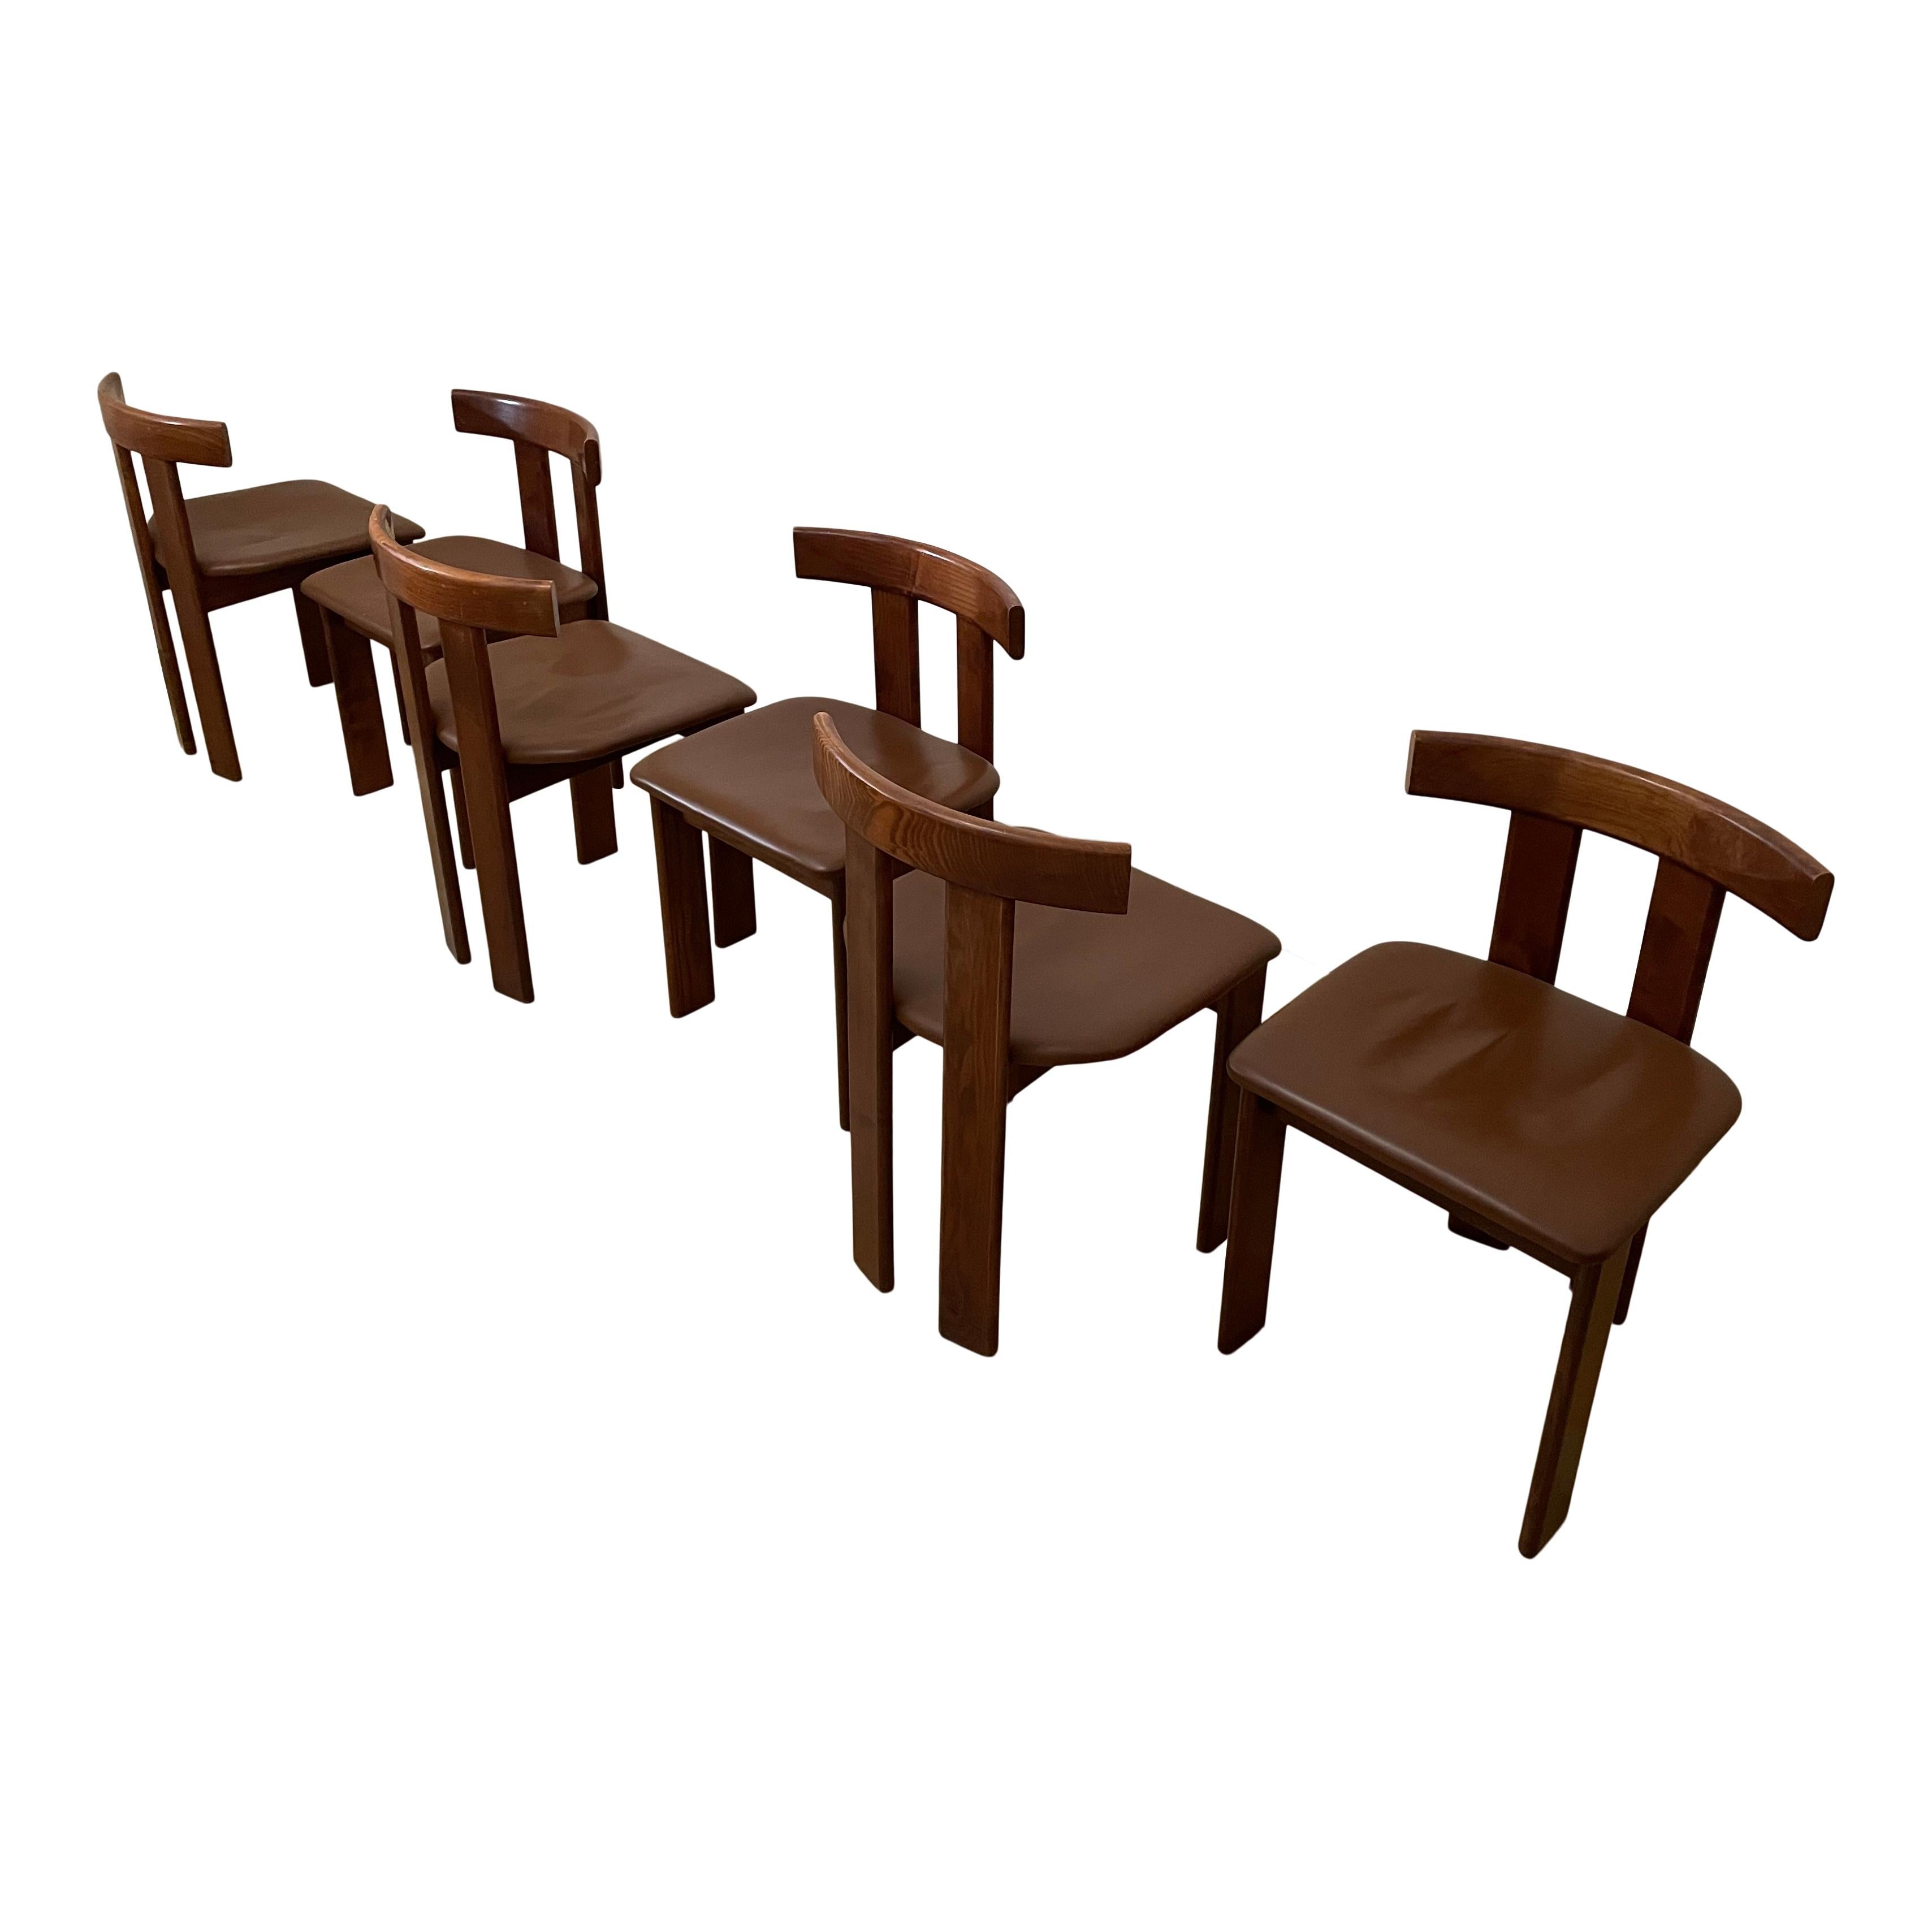 Mid-Century Modern Set of 6 Midcentury Italian Walnut and Leather Dining Chairs, 1970s For Sale